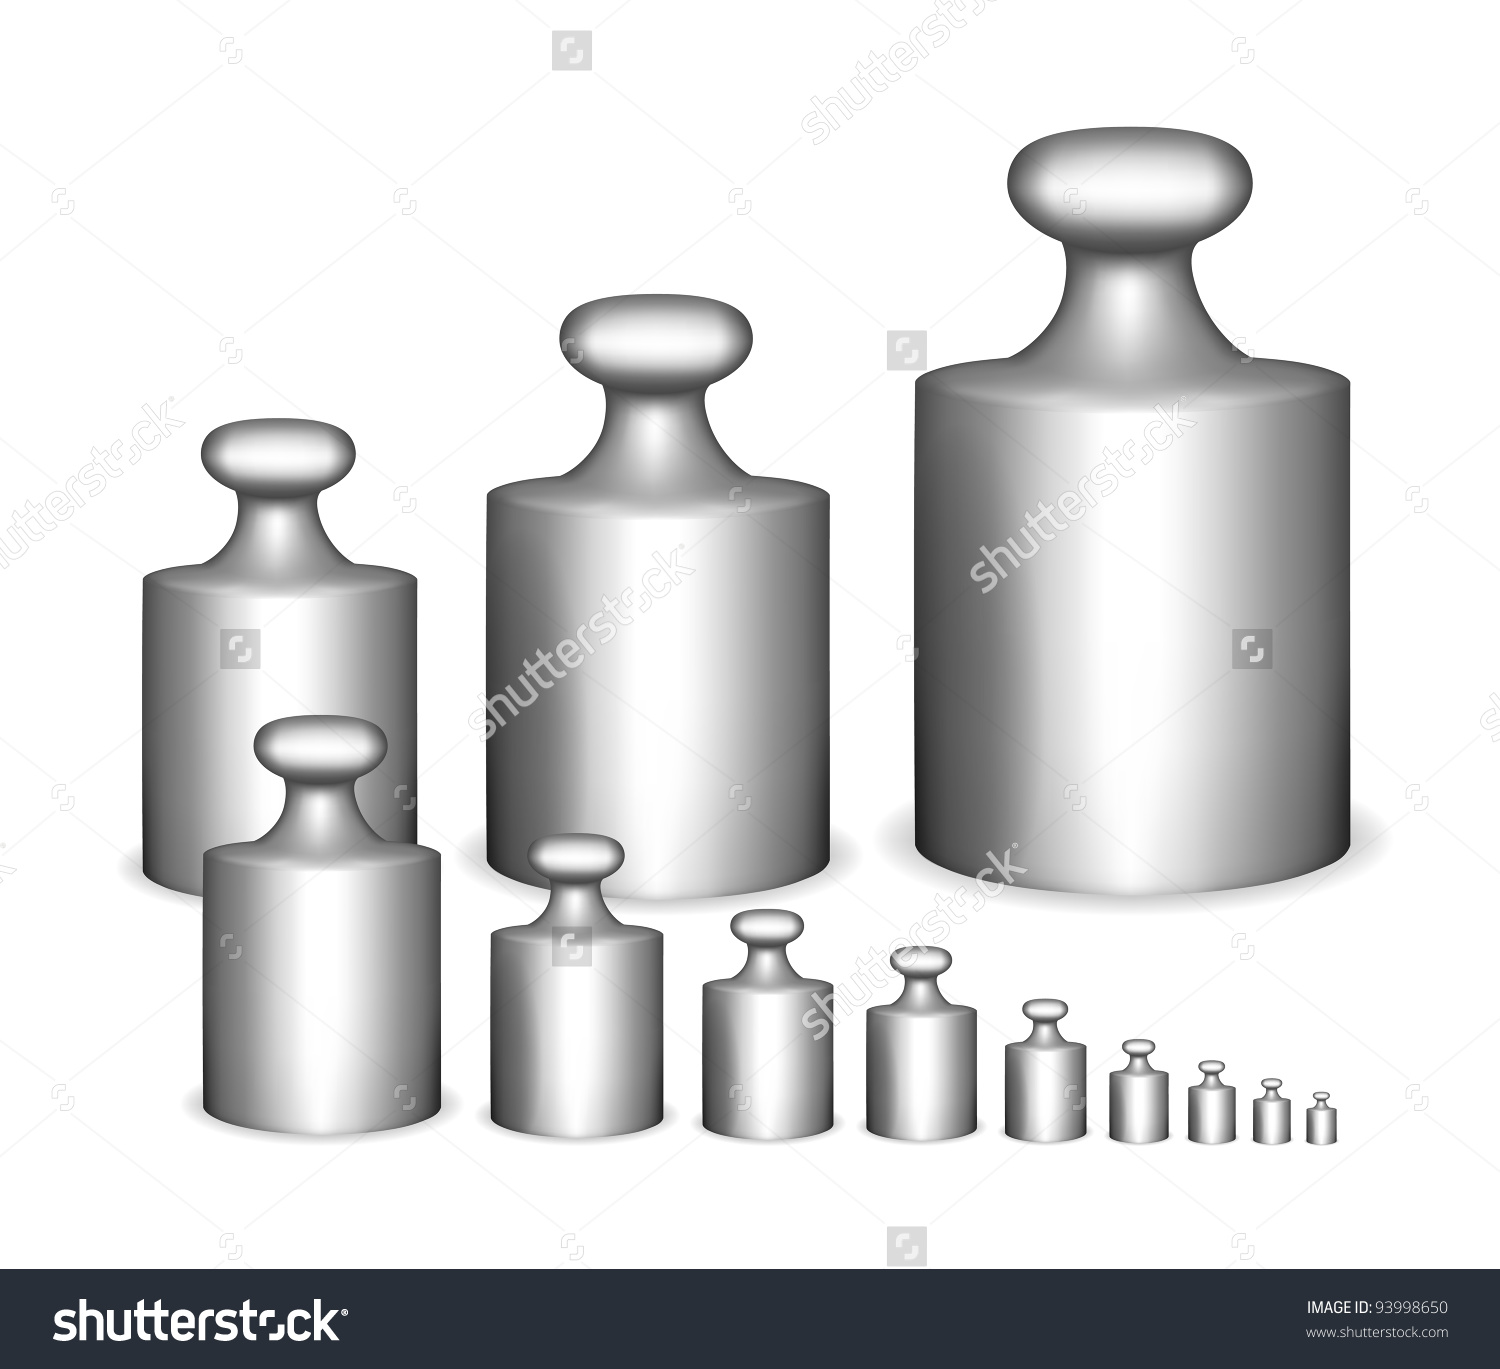 Set Of Antique Calibration Weights Vector.